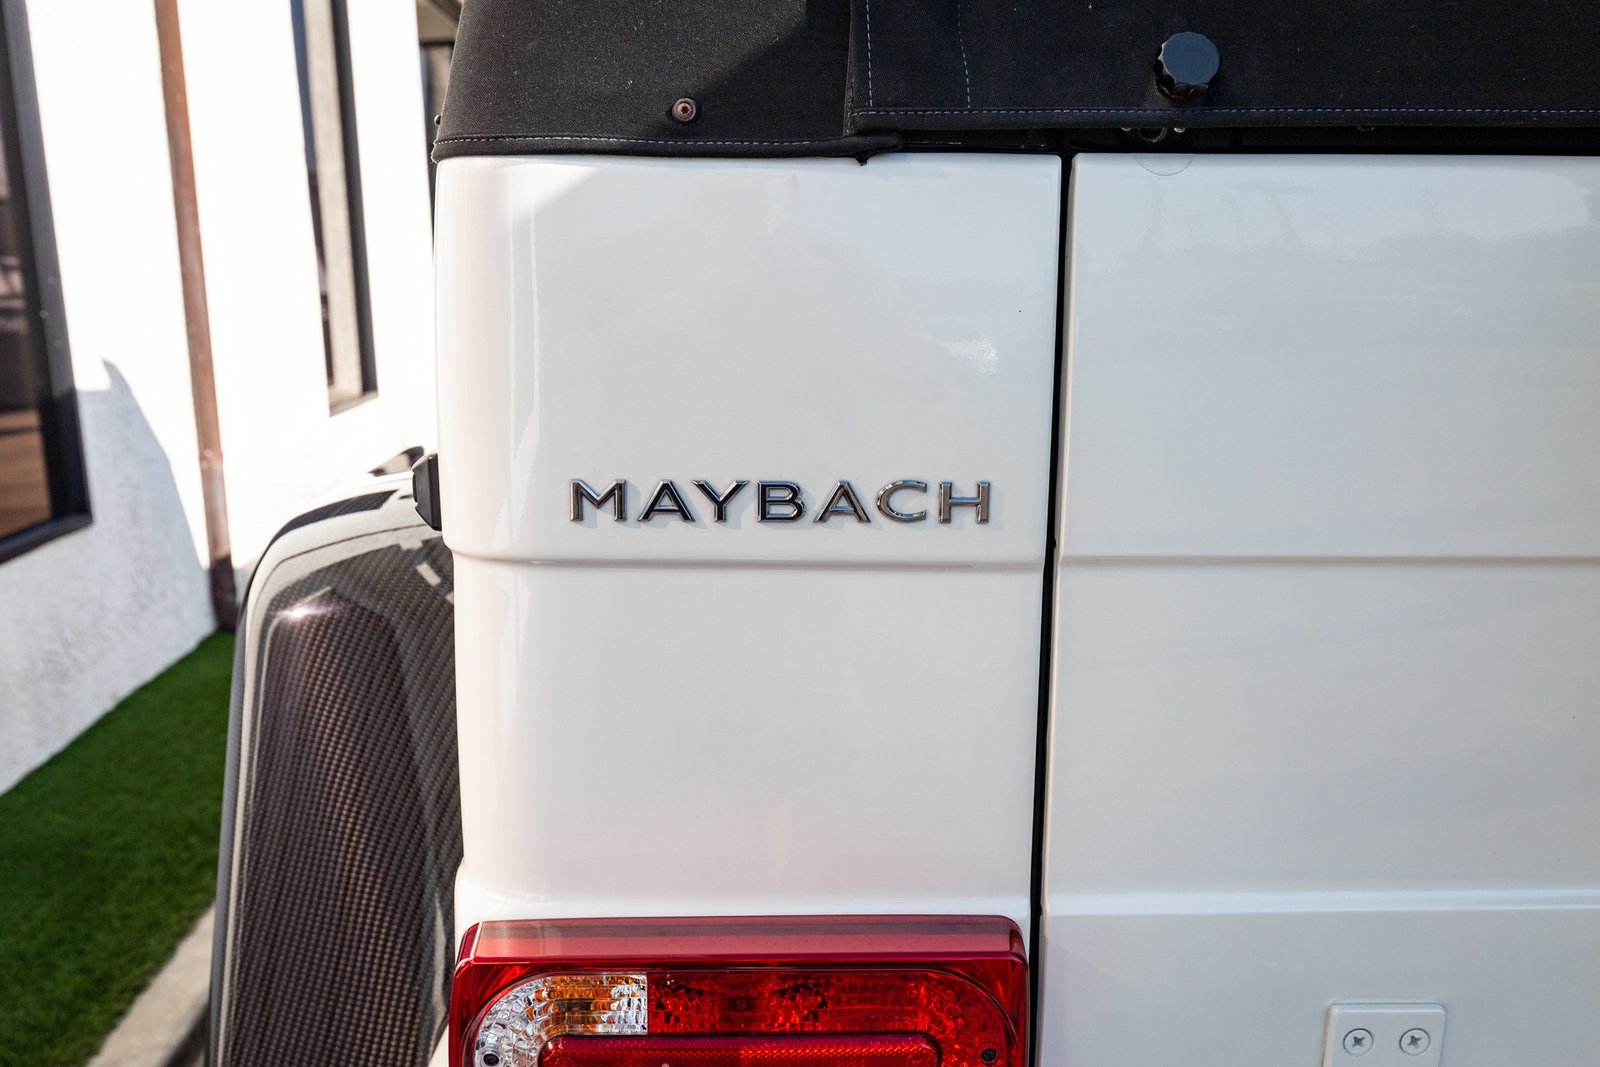 Used 2018 Mercedes-Benz G650 Maybach (22)